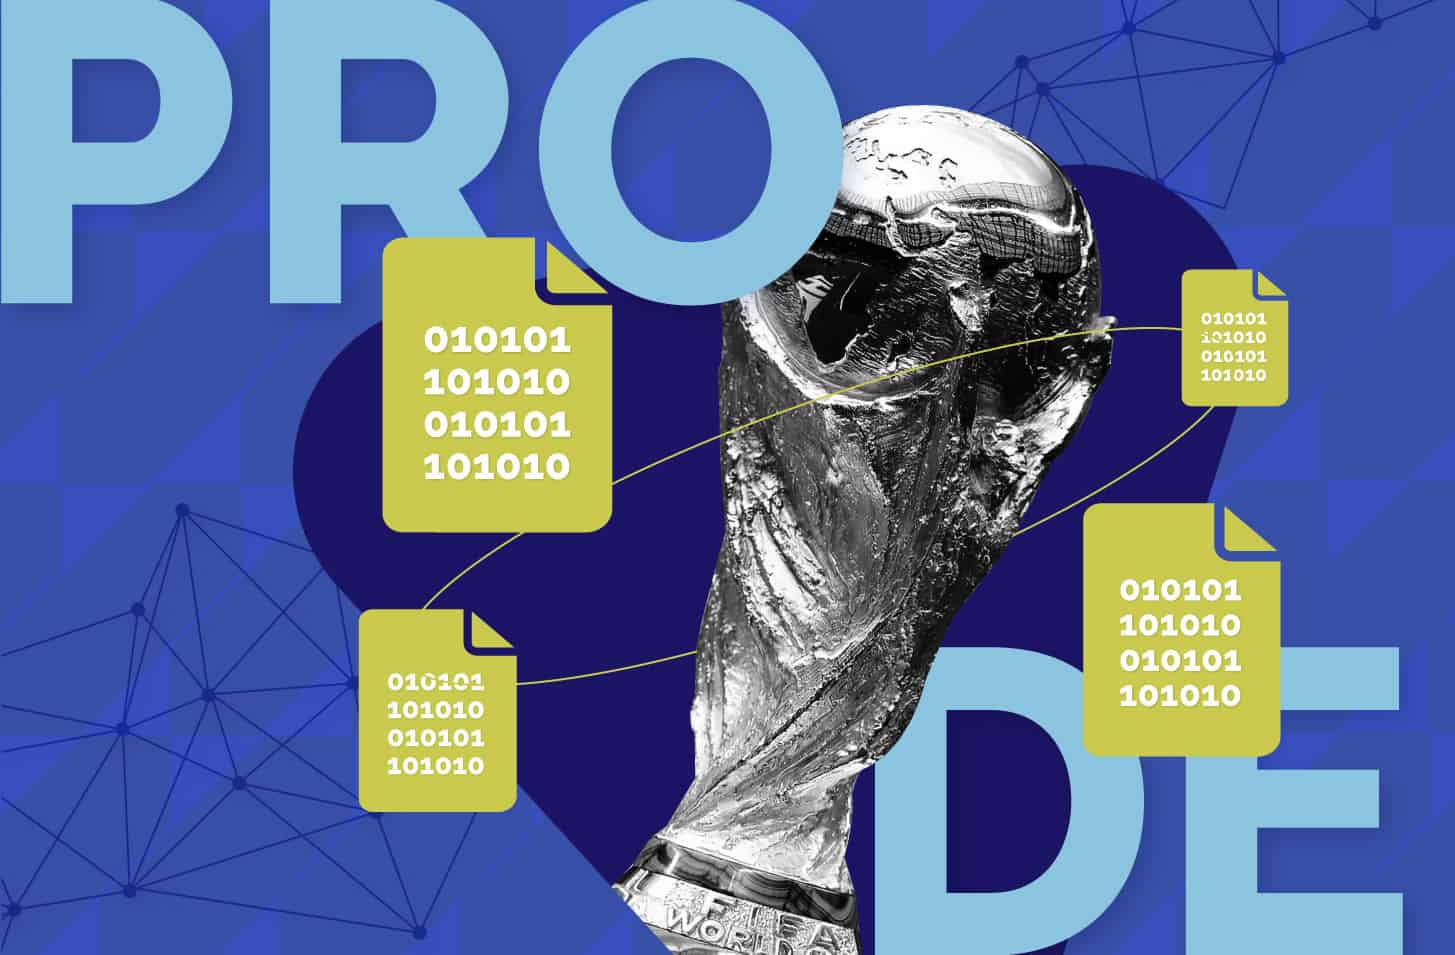 Culture, team, and games amidst the World Cup